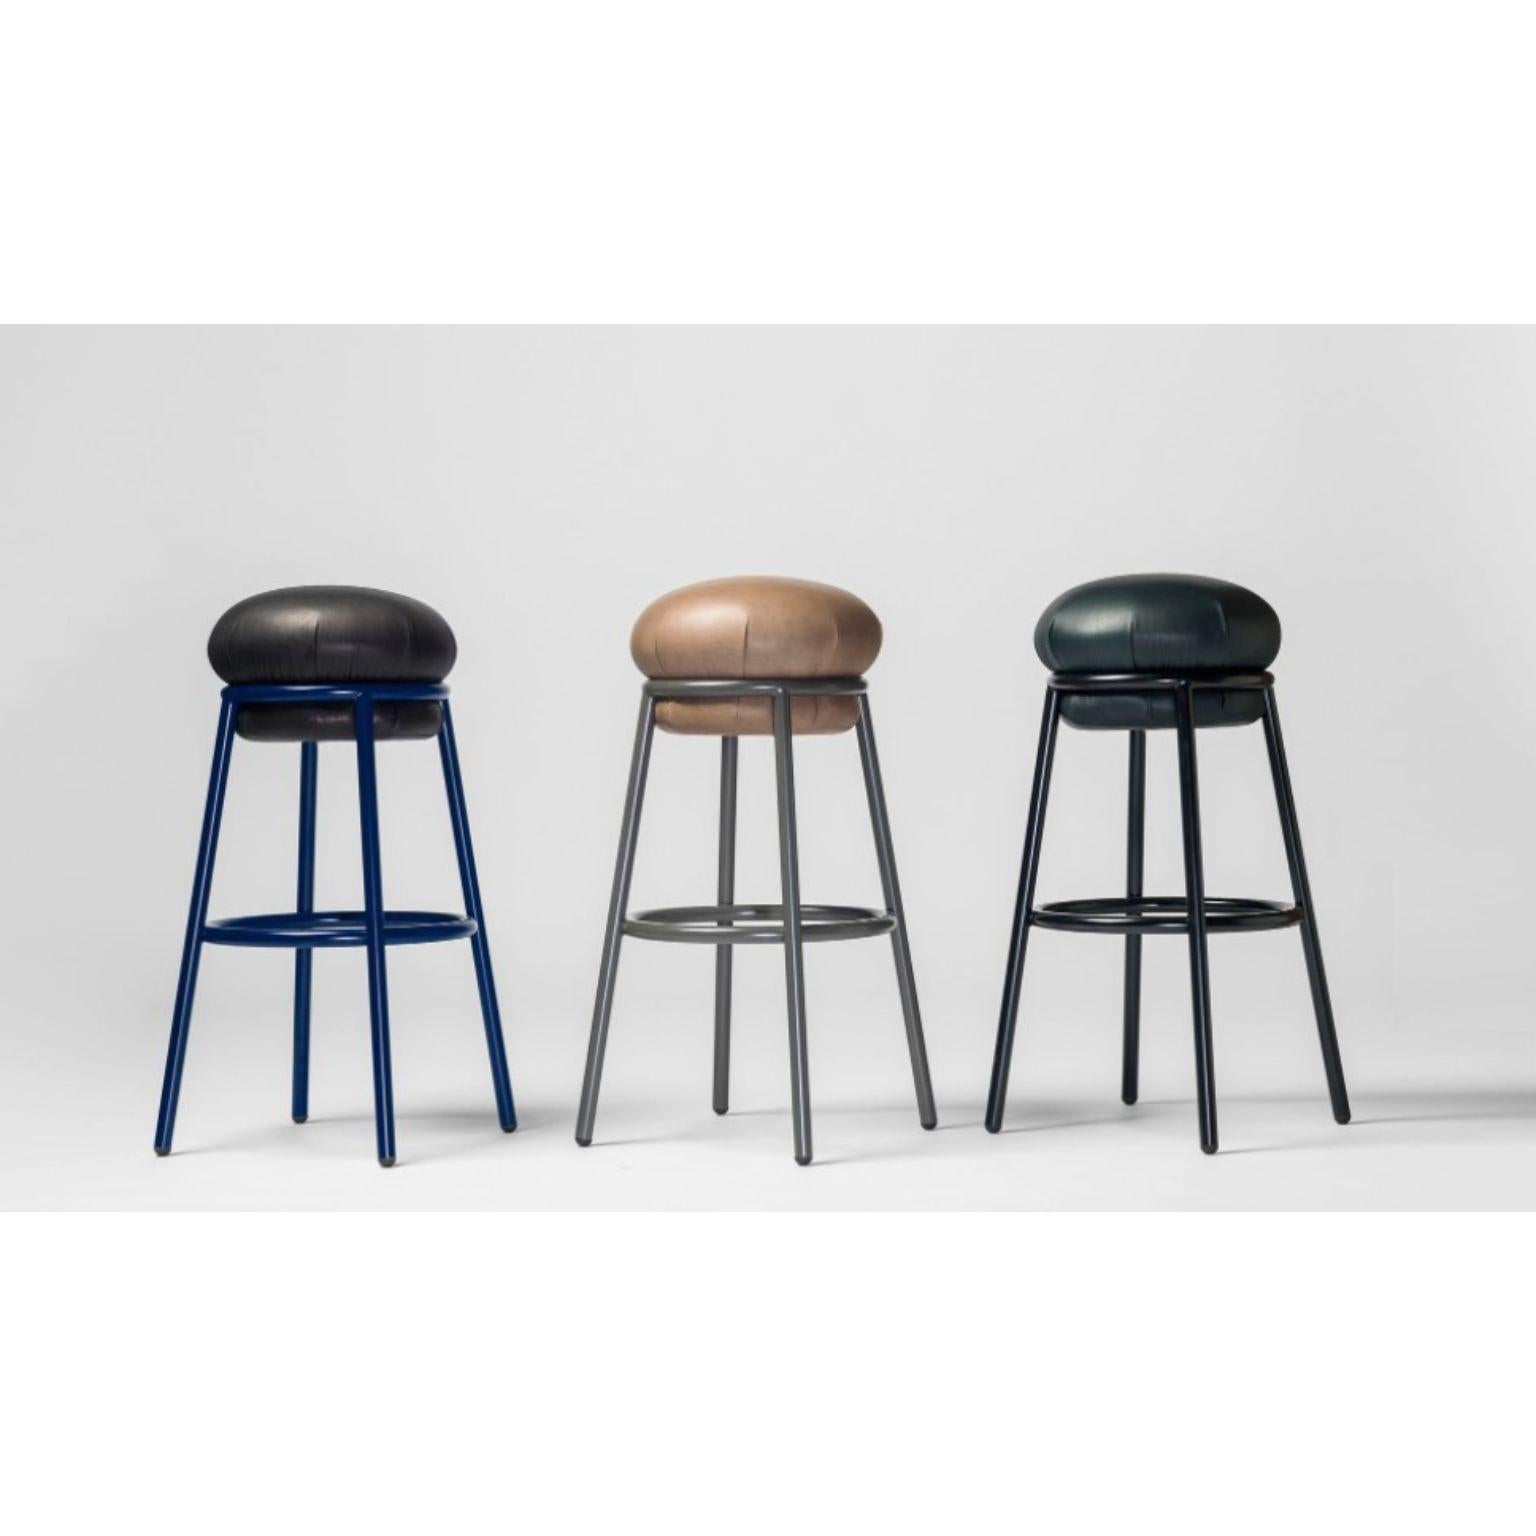 Set grasso stool by Stephen Burks
Dimensions: Diameter 39 x height 80 cm 
Materials: Tubular steel frame (25mm) stool upholstered in different materials provided by BD.
Available upholstered in different fabrics and in size Small and different